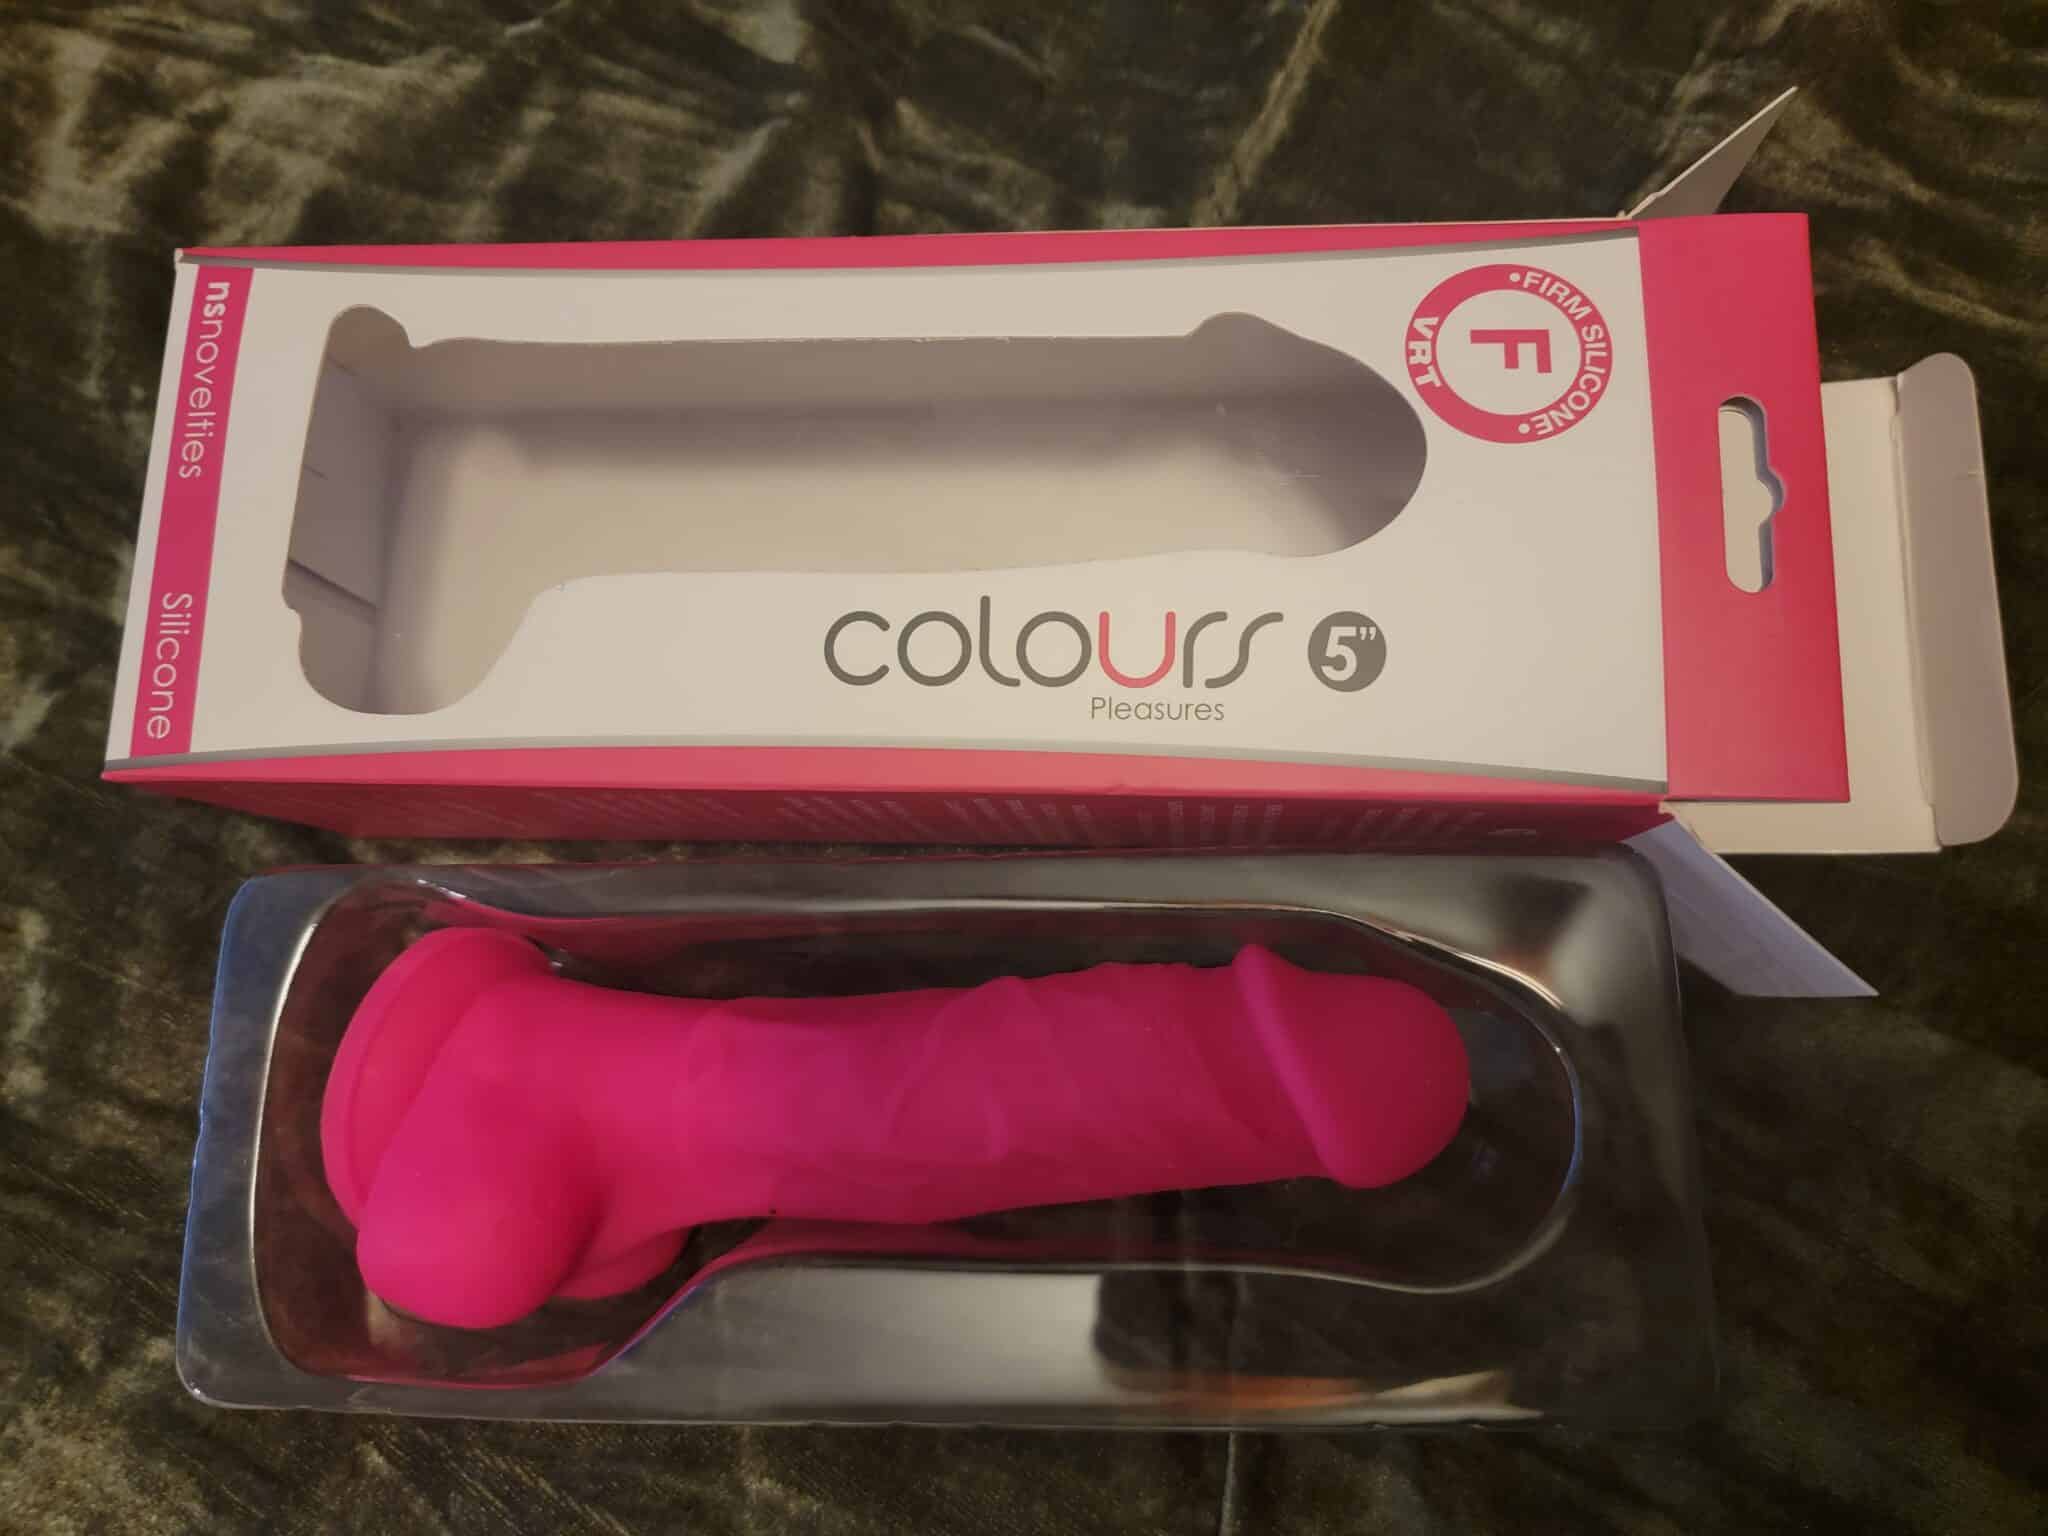 Colours Pleasures 5 Inch Dildo The Colours Pleasures 5 Inch Dildo: Budget-Friendly or Overpriced?